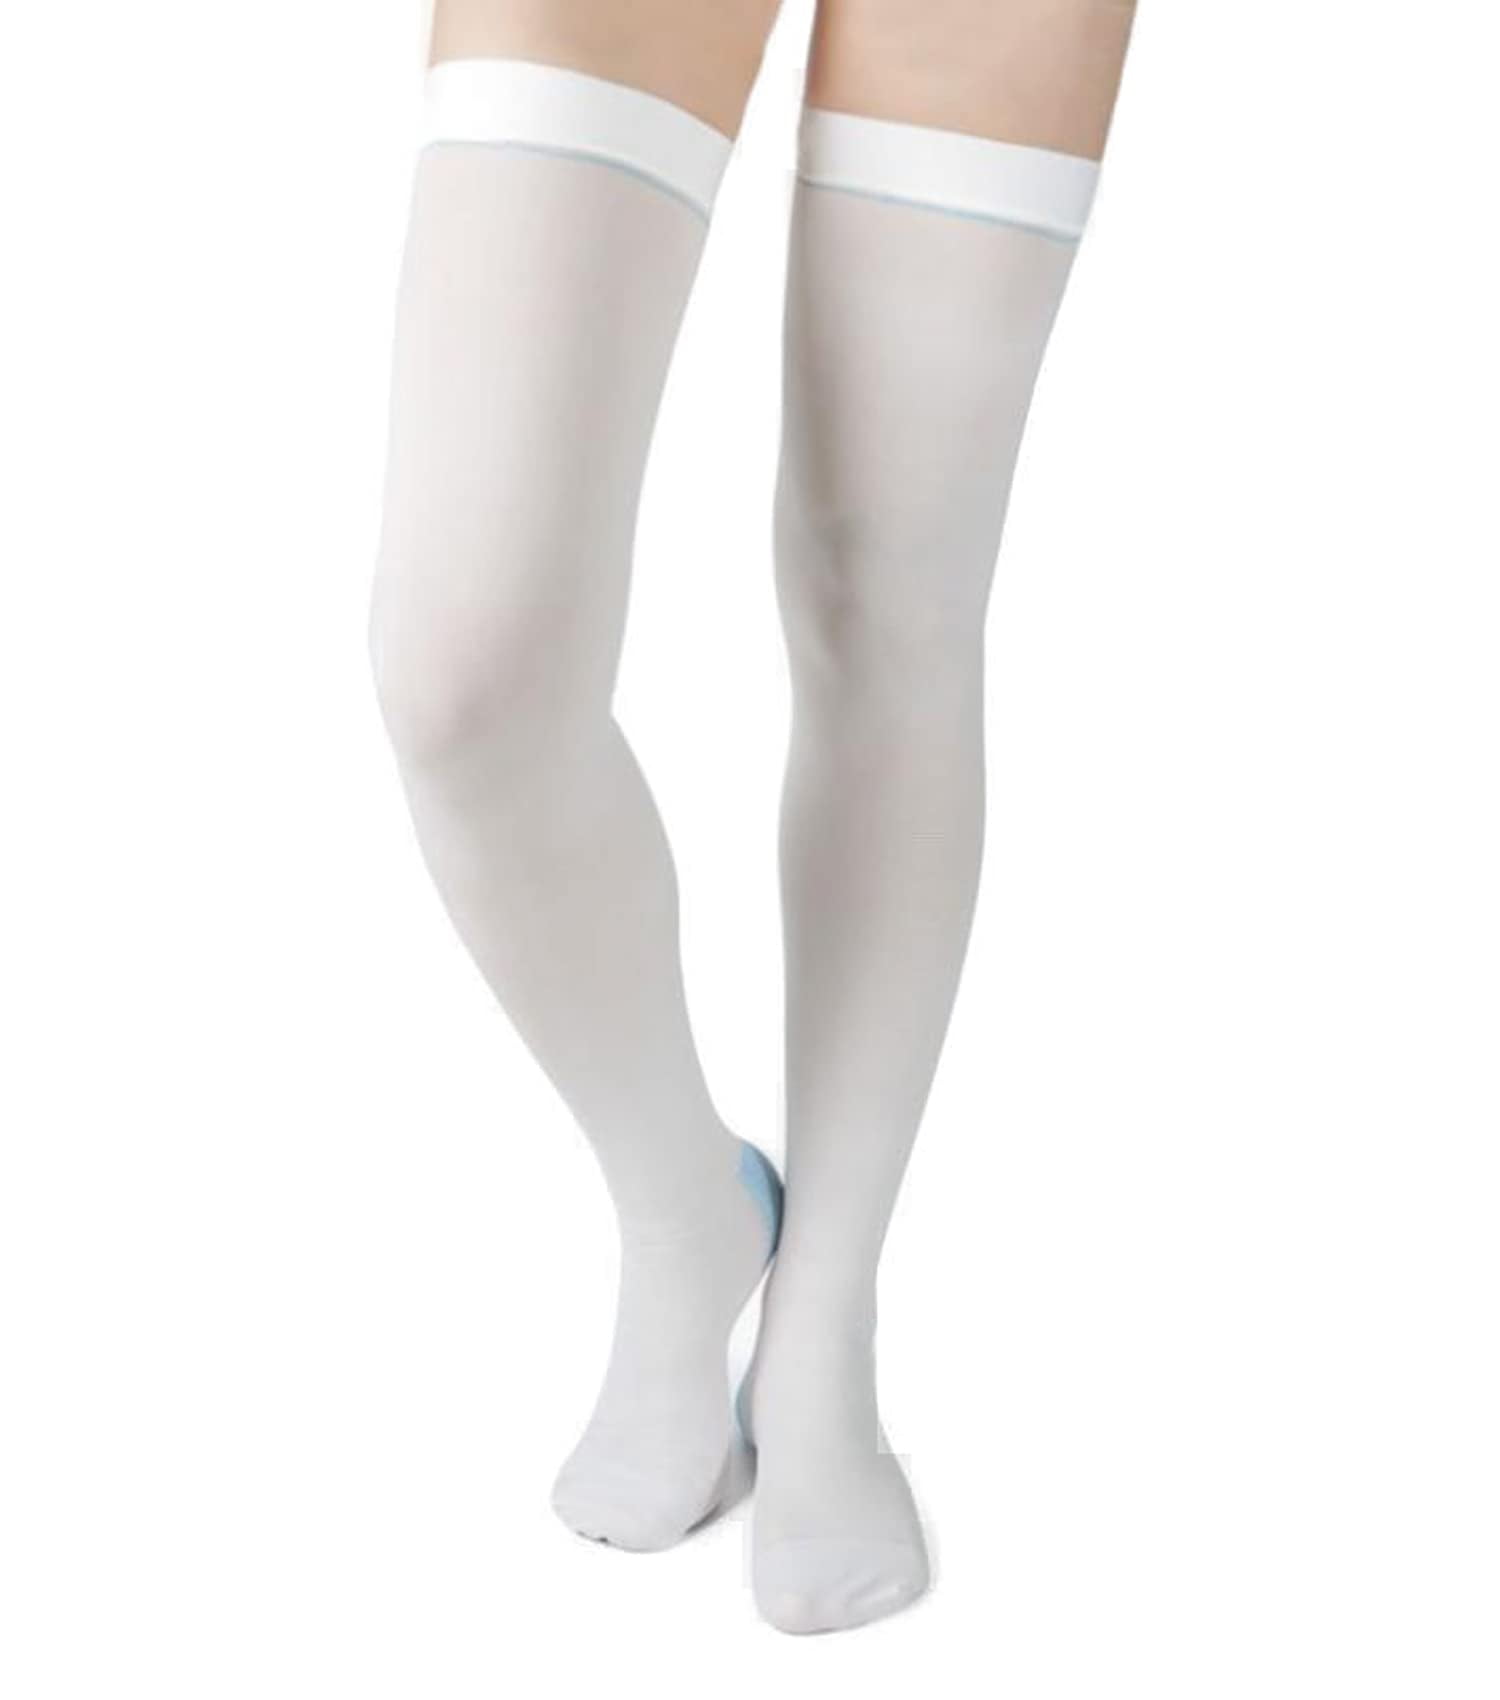 GetUSCart- T.E.D. Anti Embolism Stockings for Women Men Thigh High, 15-20  mmHg Compression TED Hose with Inspect Toe Hole